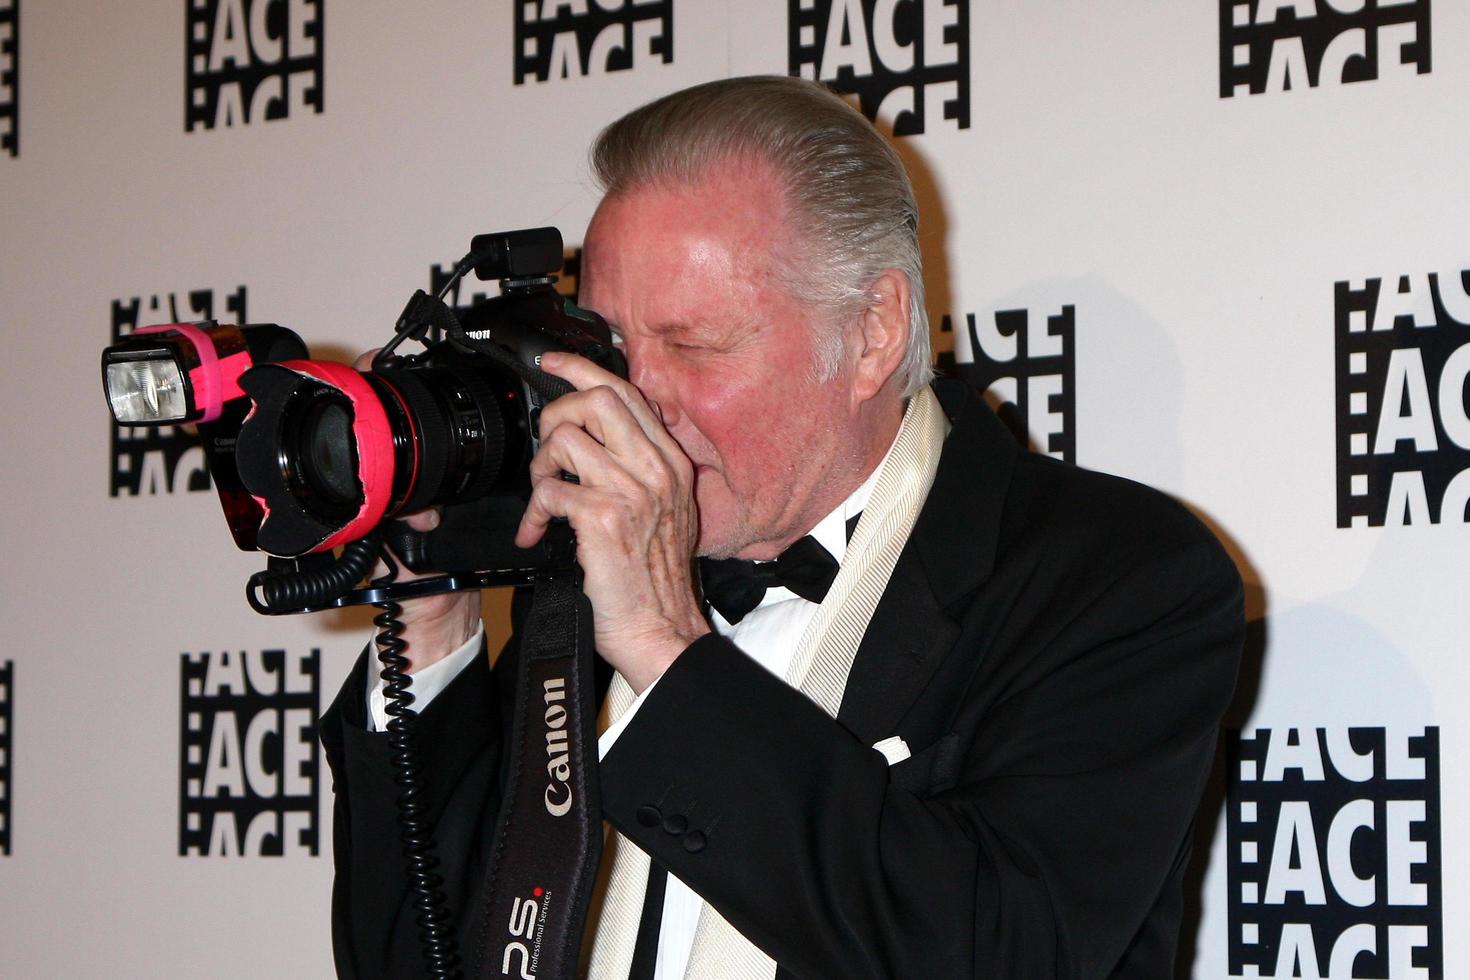 LOS ANGELES, FEB 17 -  Jon Voight arrives at the 63rd Annual ACE Eddie Awards at the Beverly Hilton Hotel on February 17, 2013 in Beverly Hills, CA photo